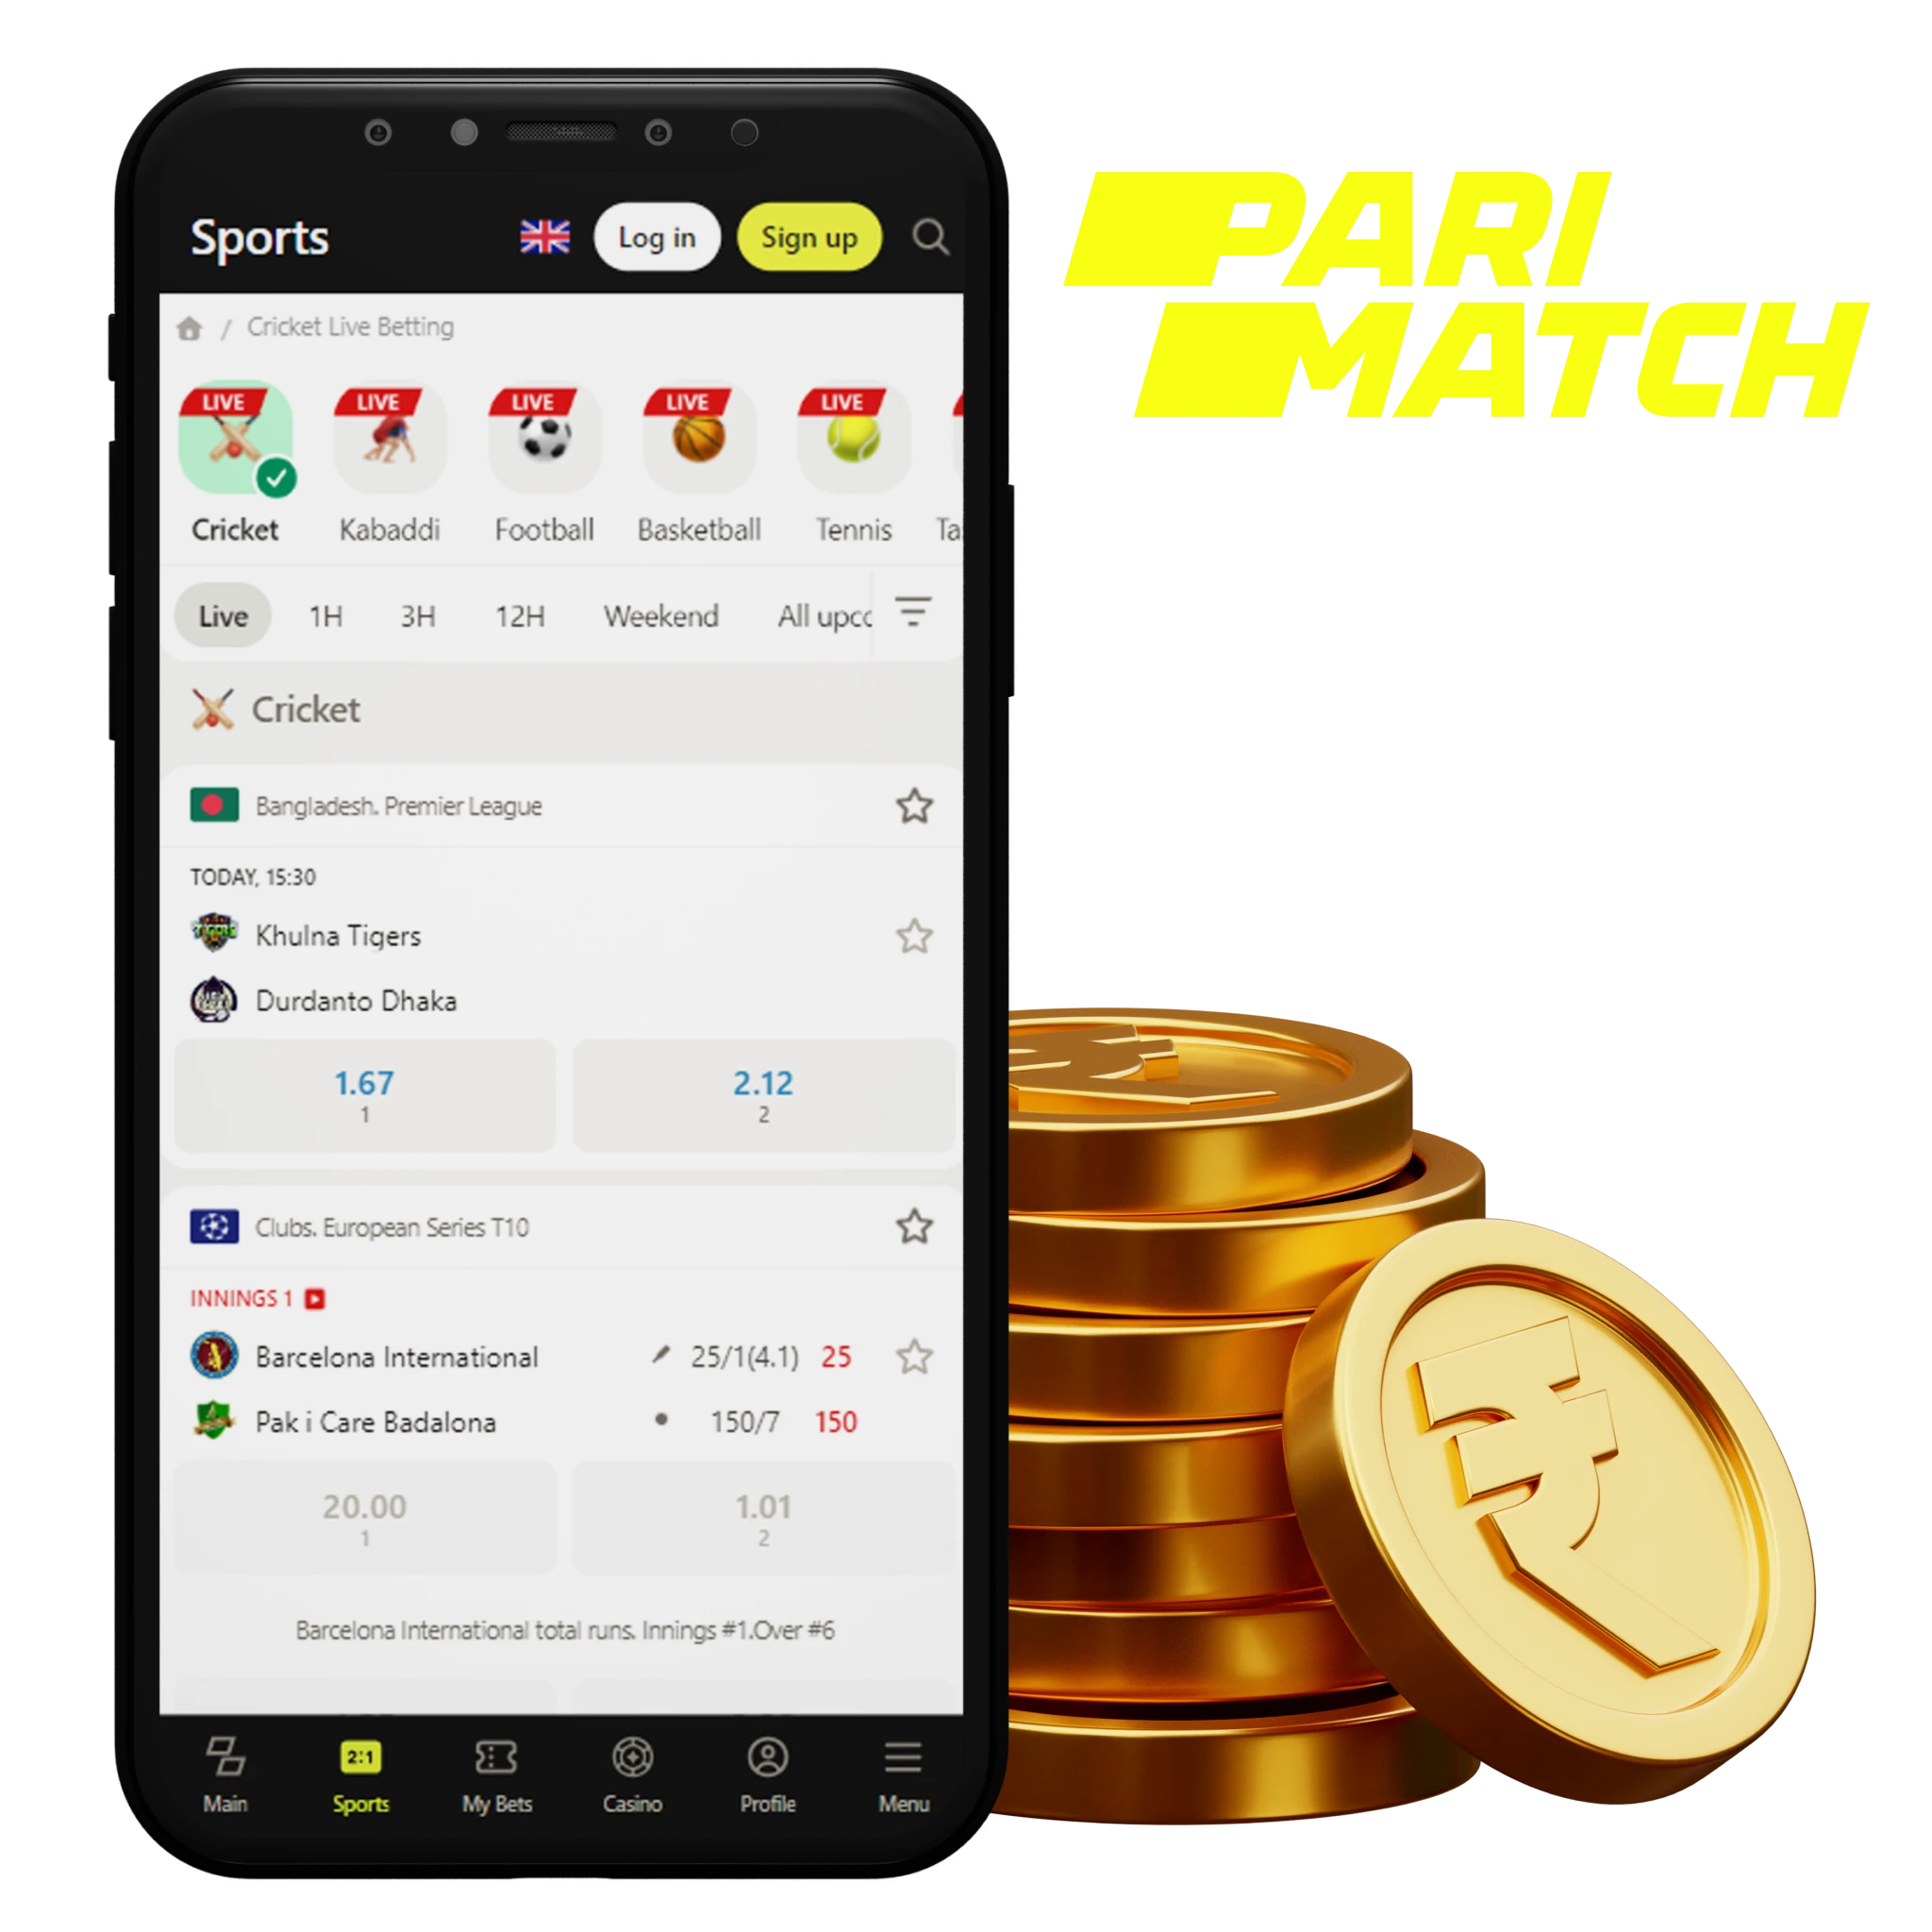 The Parimatch application is filled with all the basic features for betting on cricket for real money.